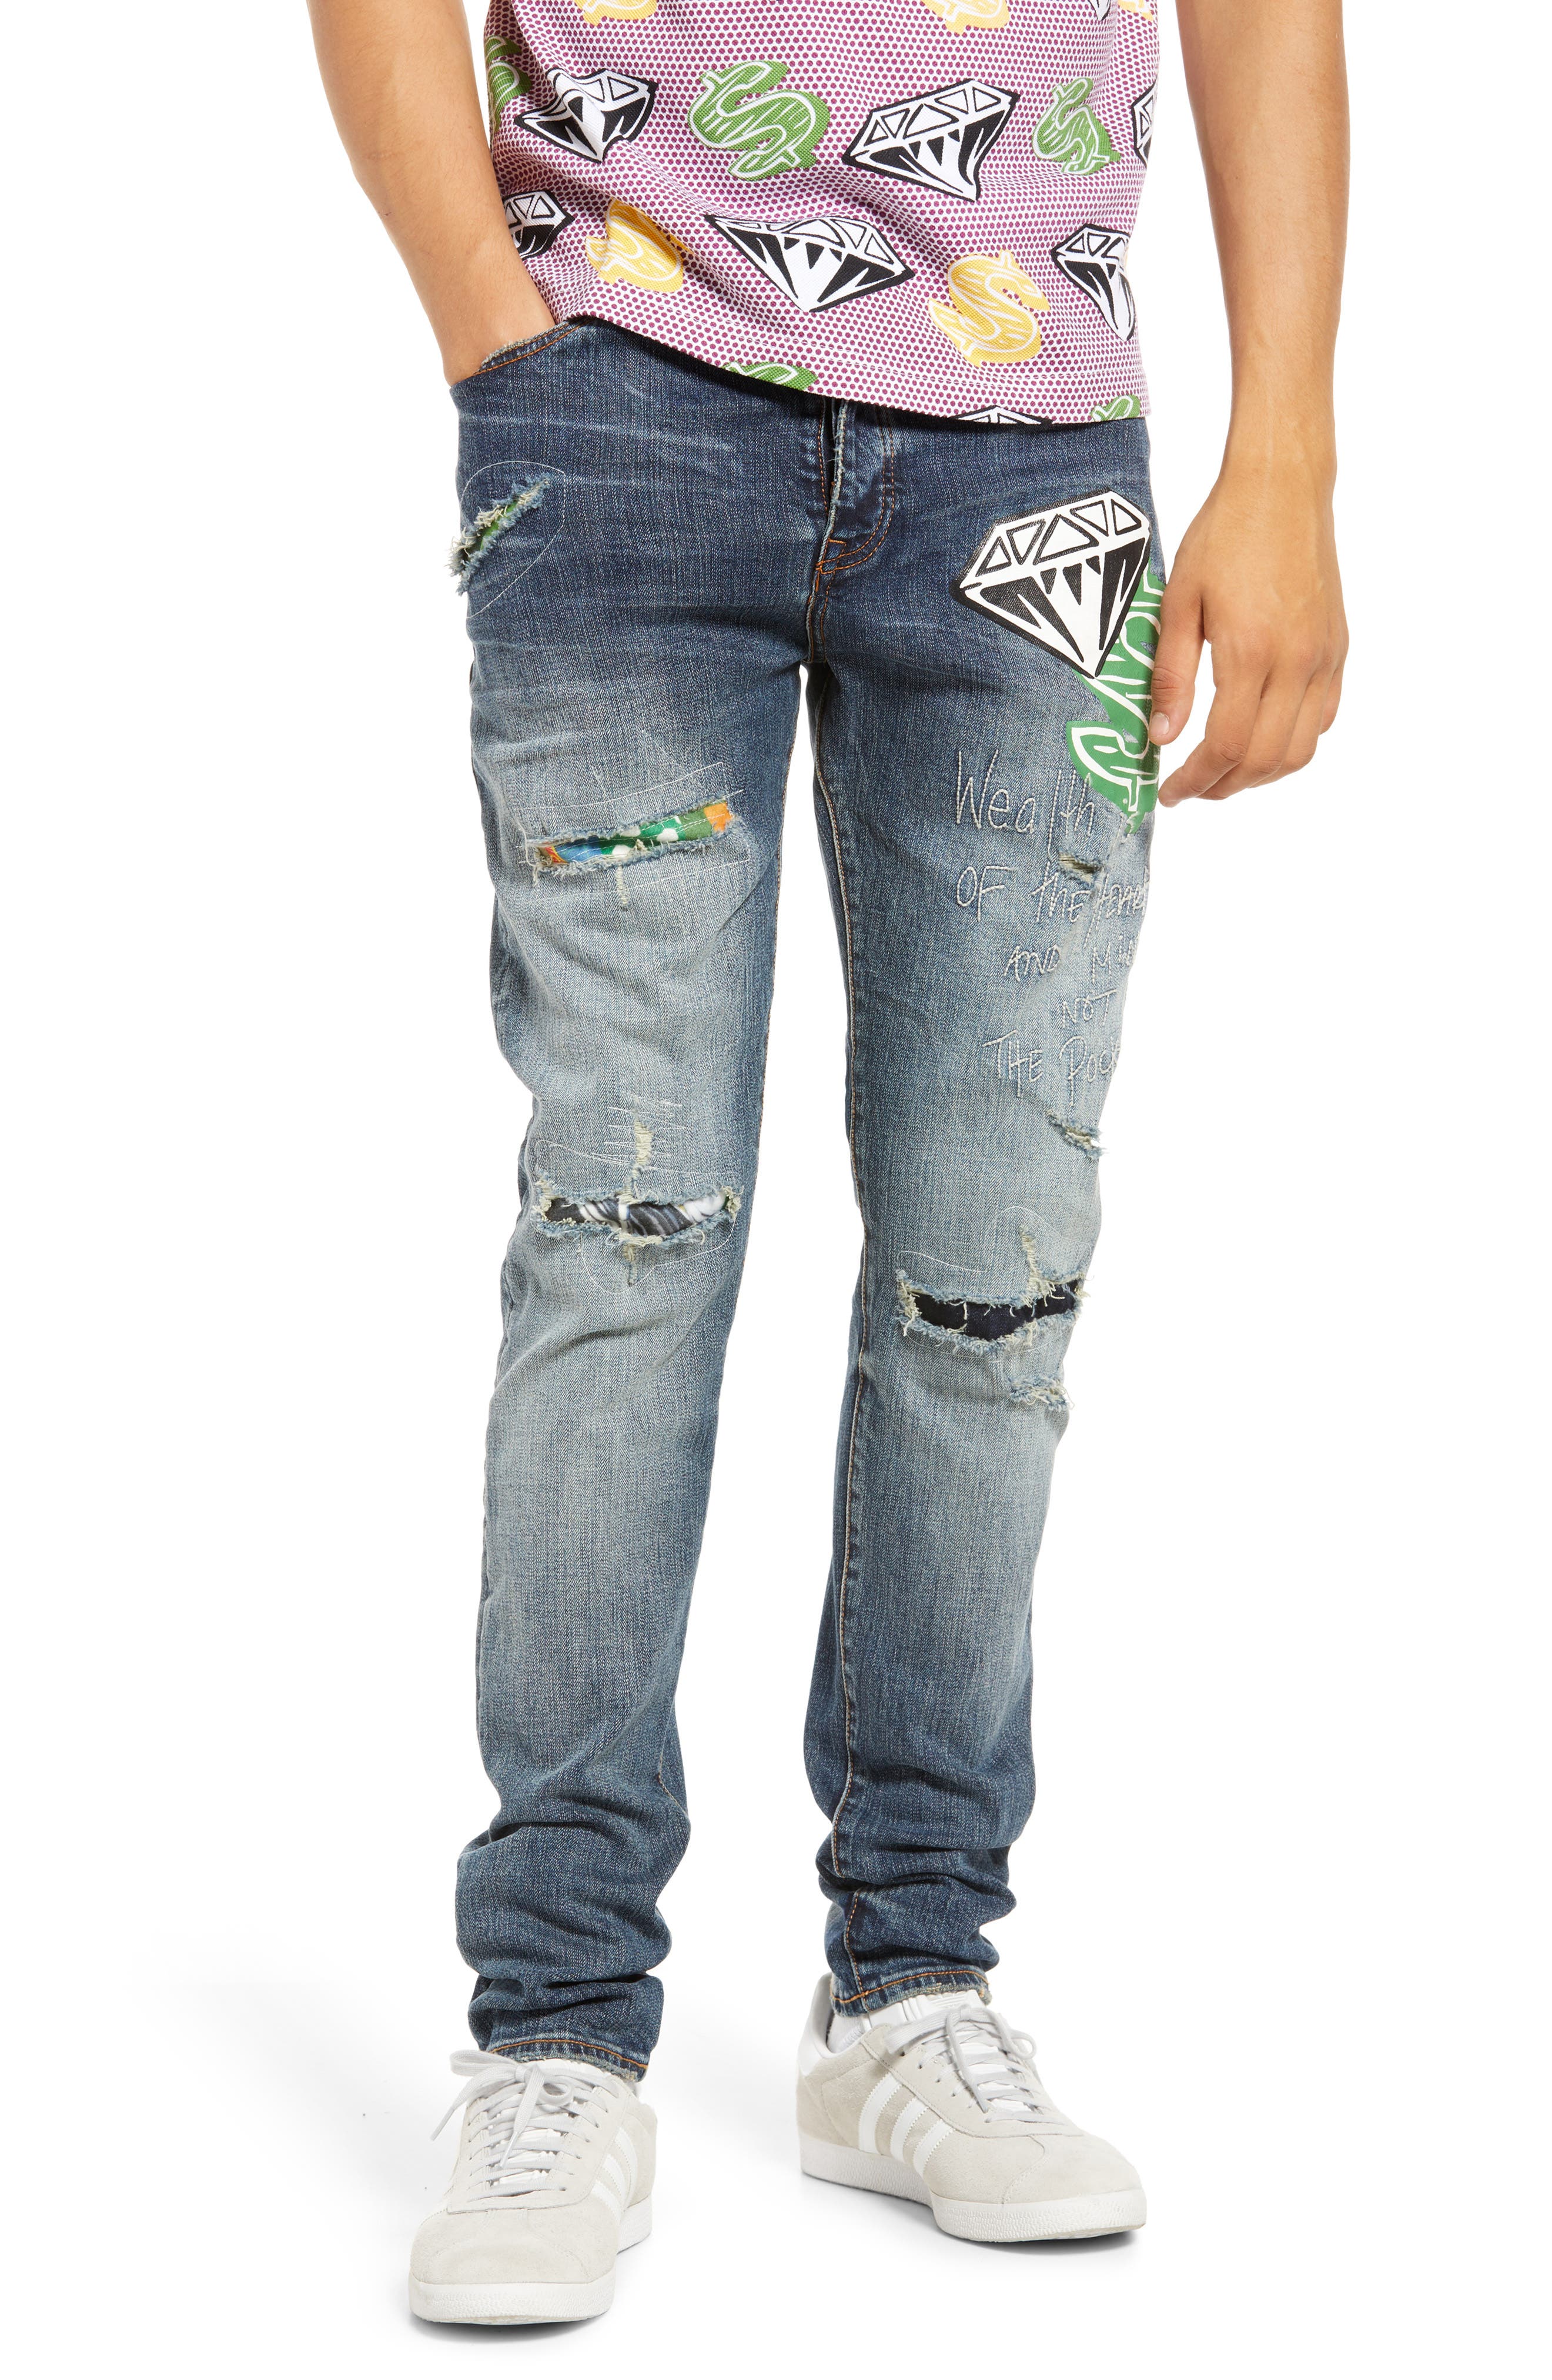 Billionaire Boys Club BB Universe Jeans in Crater at Nordstrom, Size 34